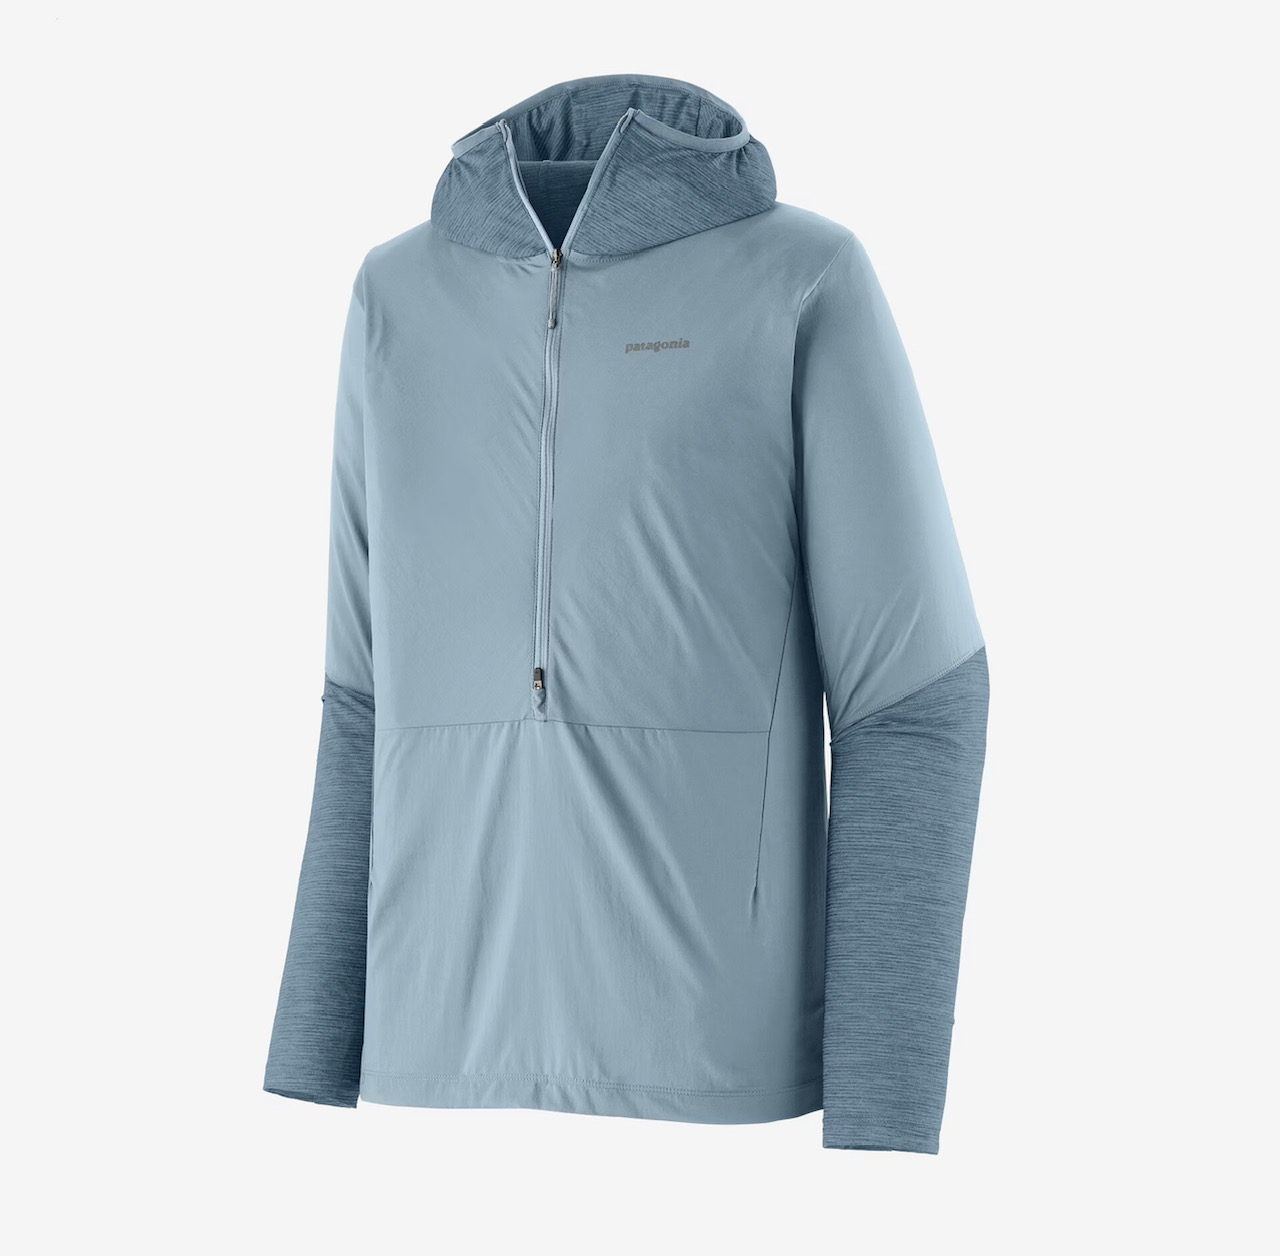 Patagonia M's Airshed Pro Pullover - Steam Blue - Large